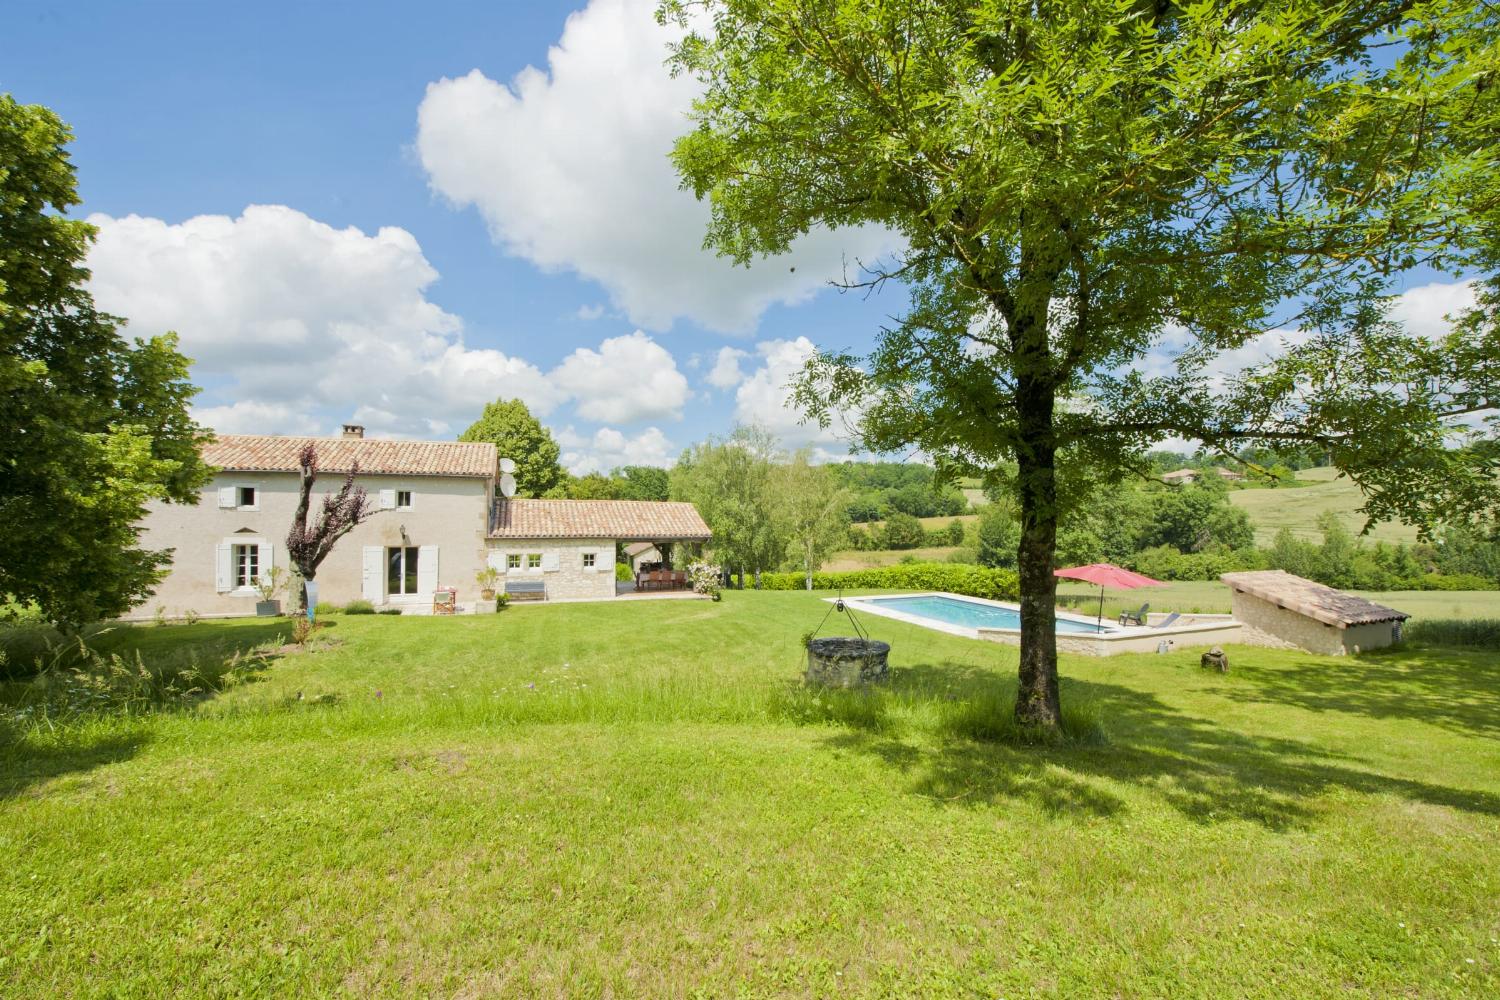 Rental accommodation in Nouvelle-Aquitaine